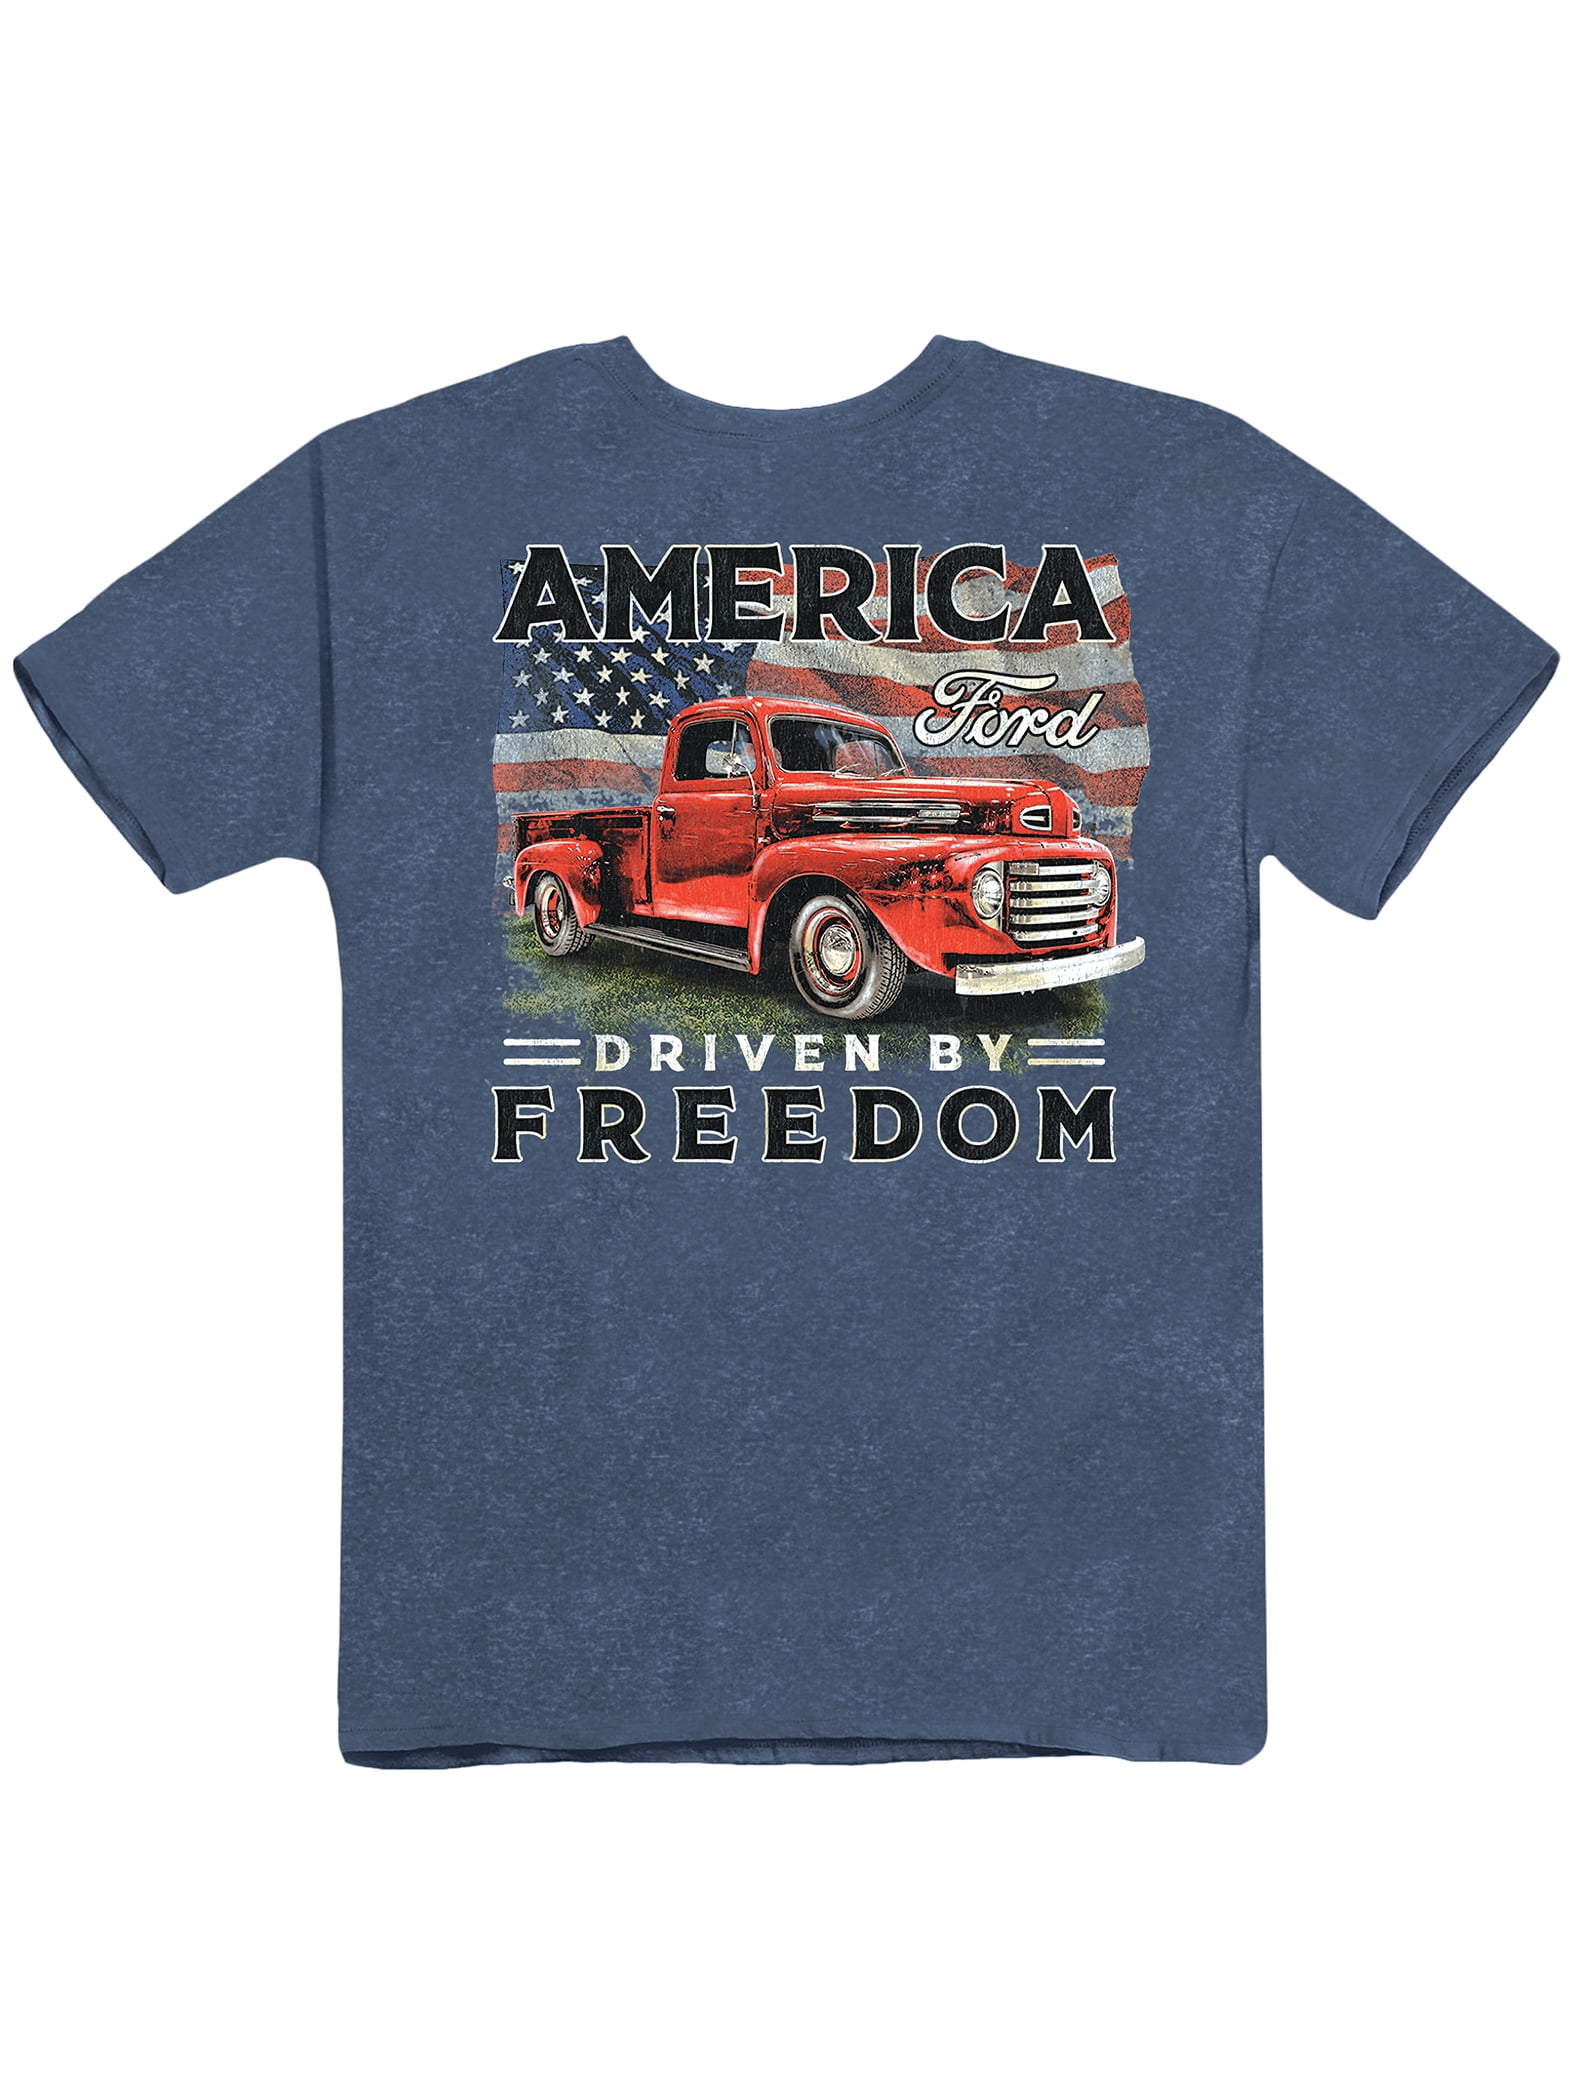 Collections Etc America - Driven By Freedom Ford Pickup Truck T-Shirt -  Walmart.com